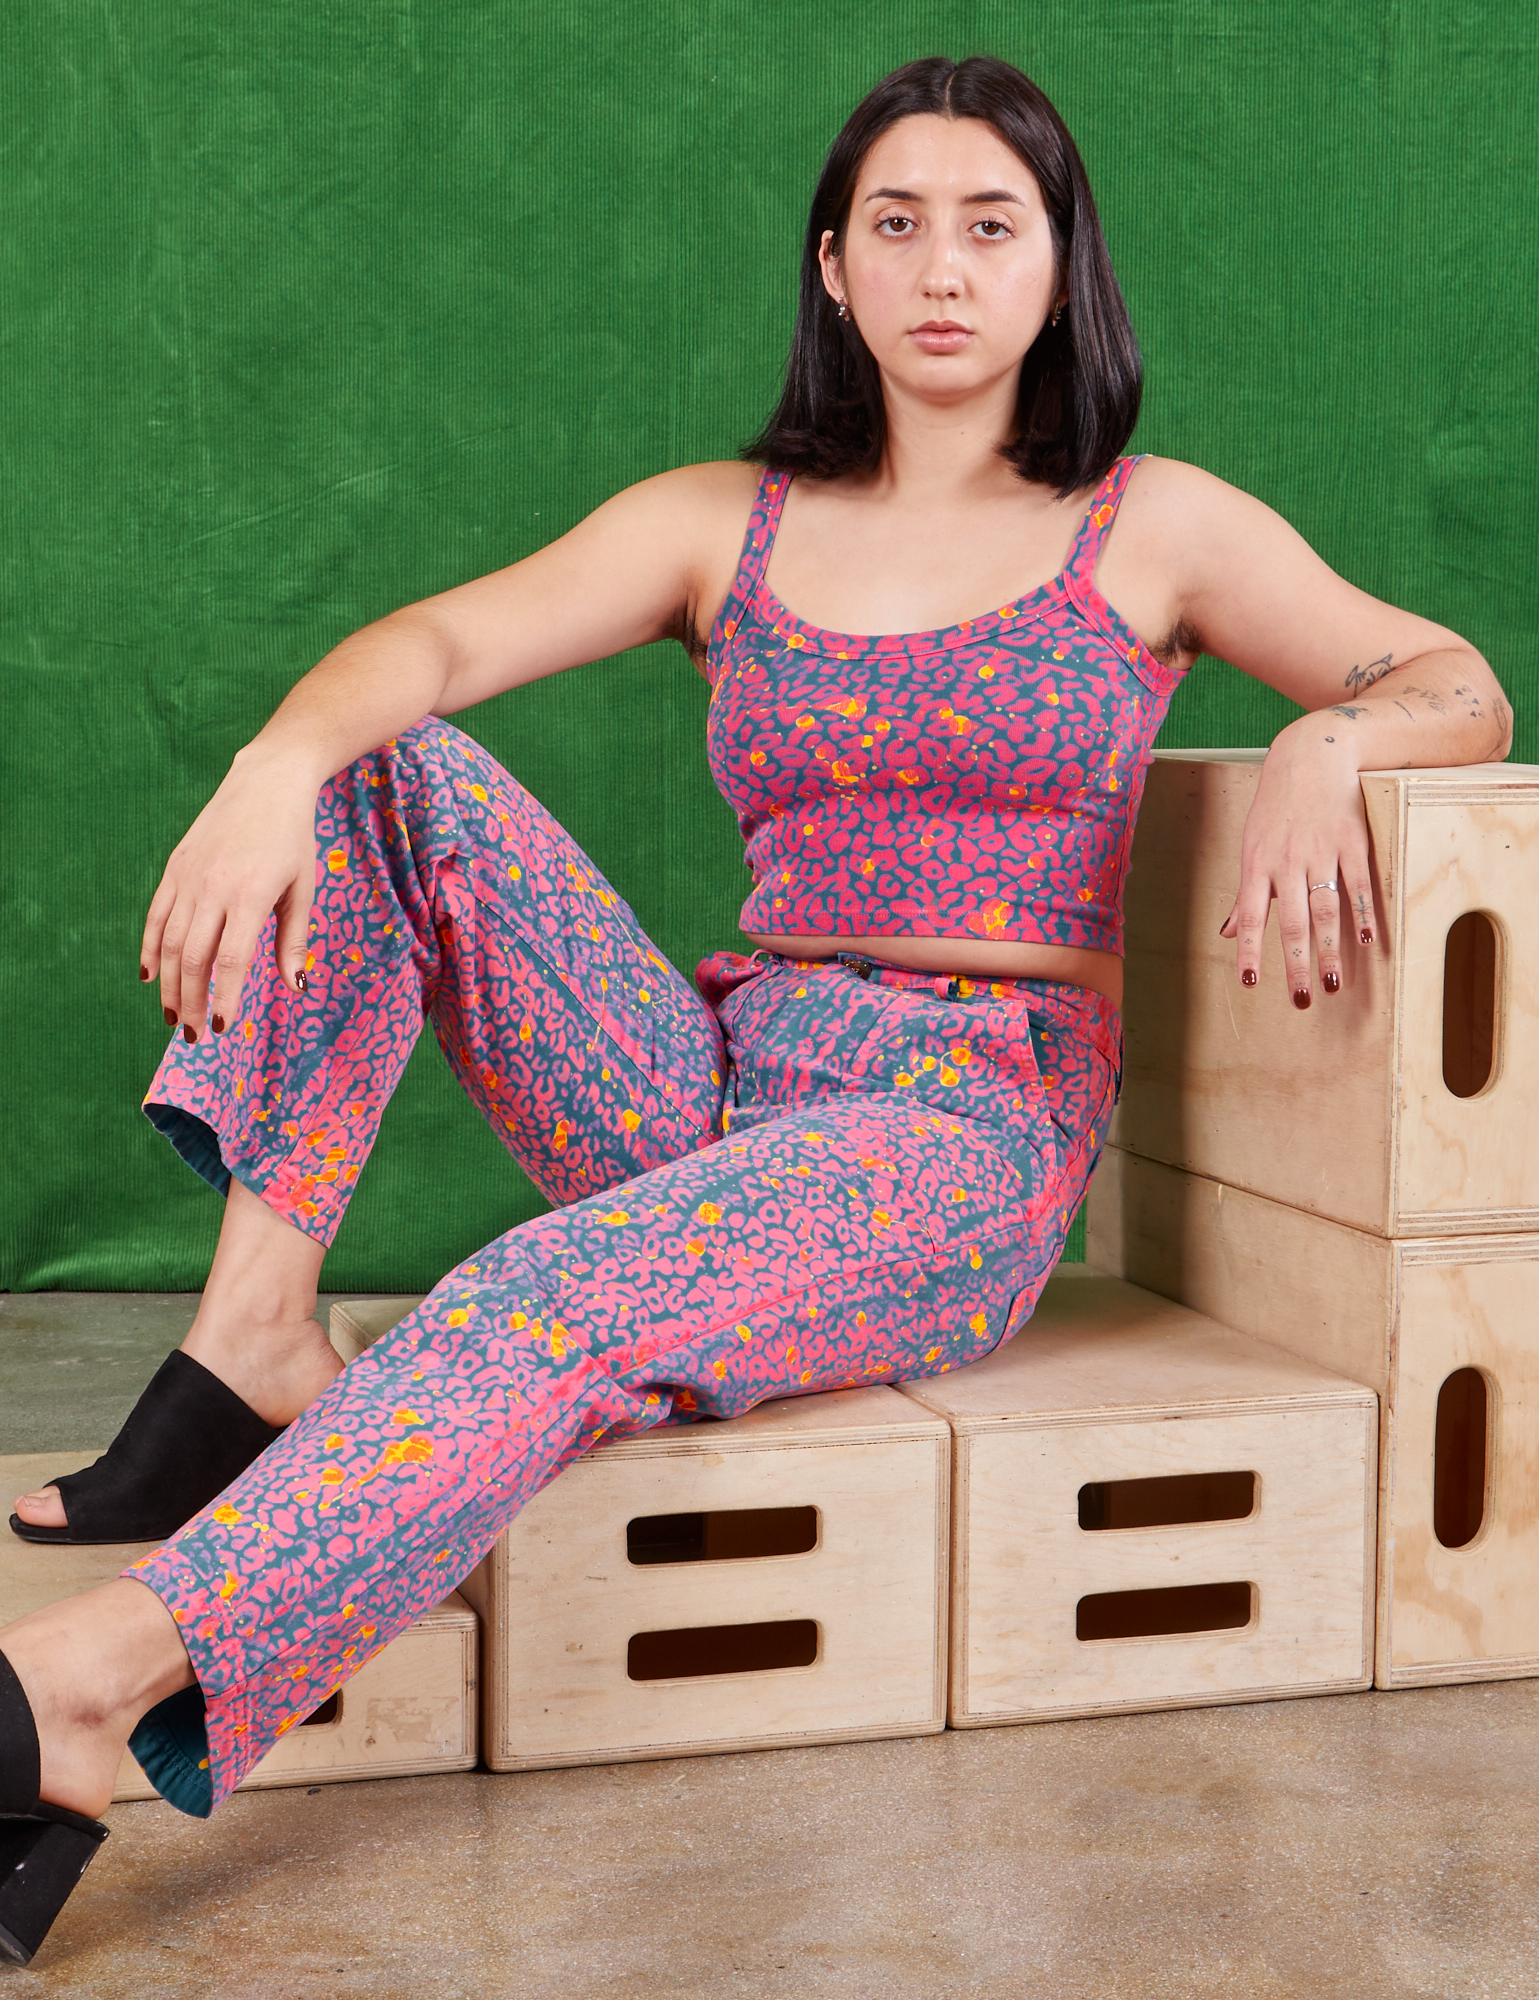 Betty is wearing XXS Cami in Electric Leopard paired with matching Work Pants